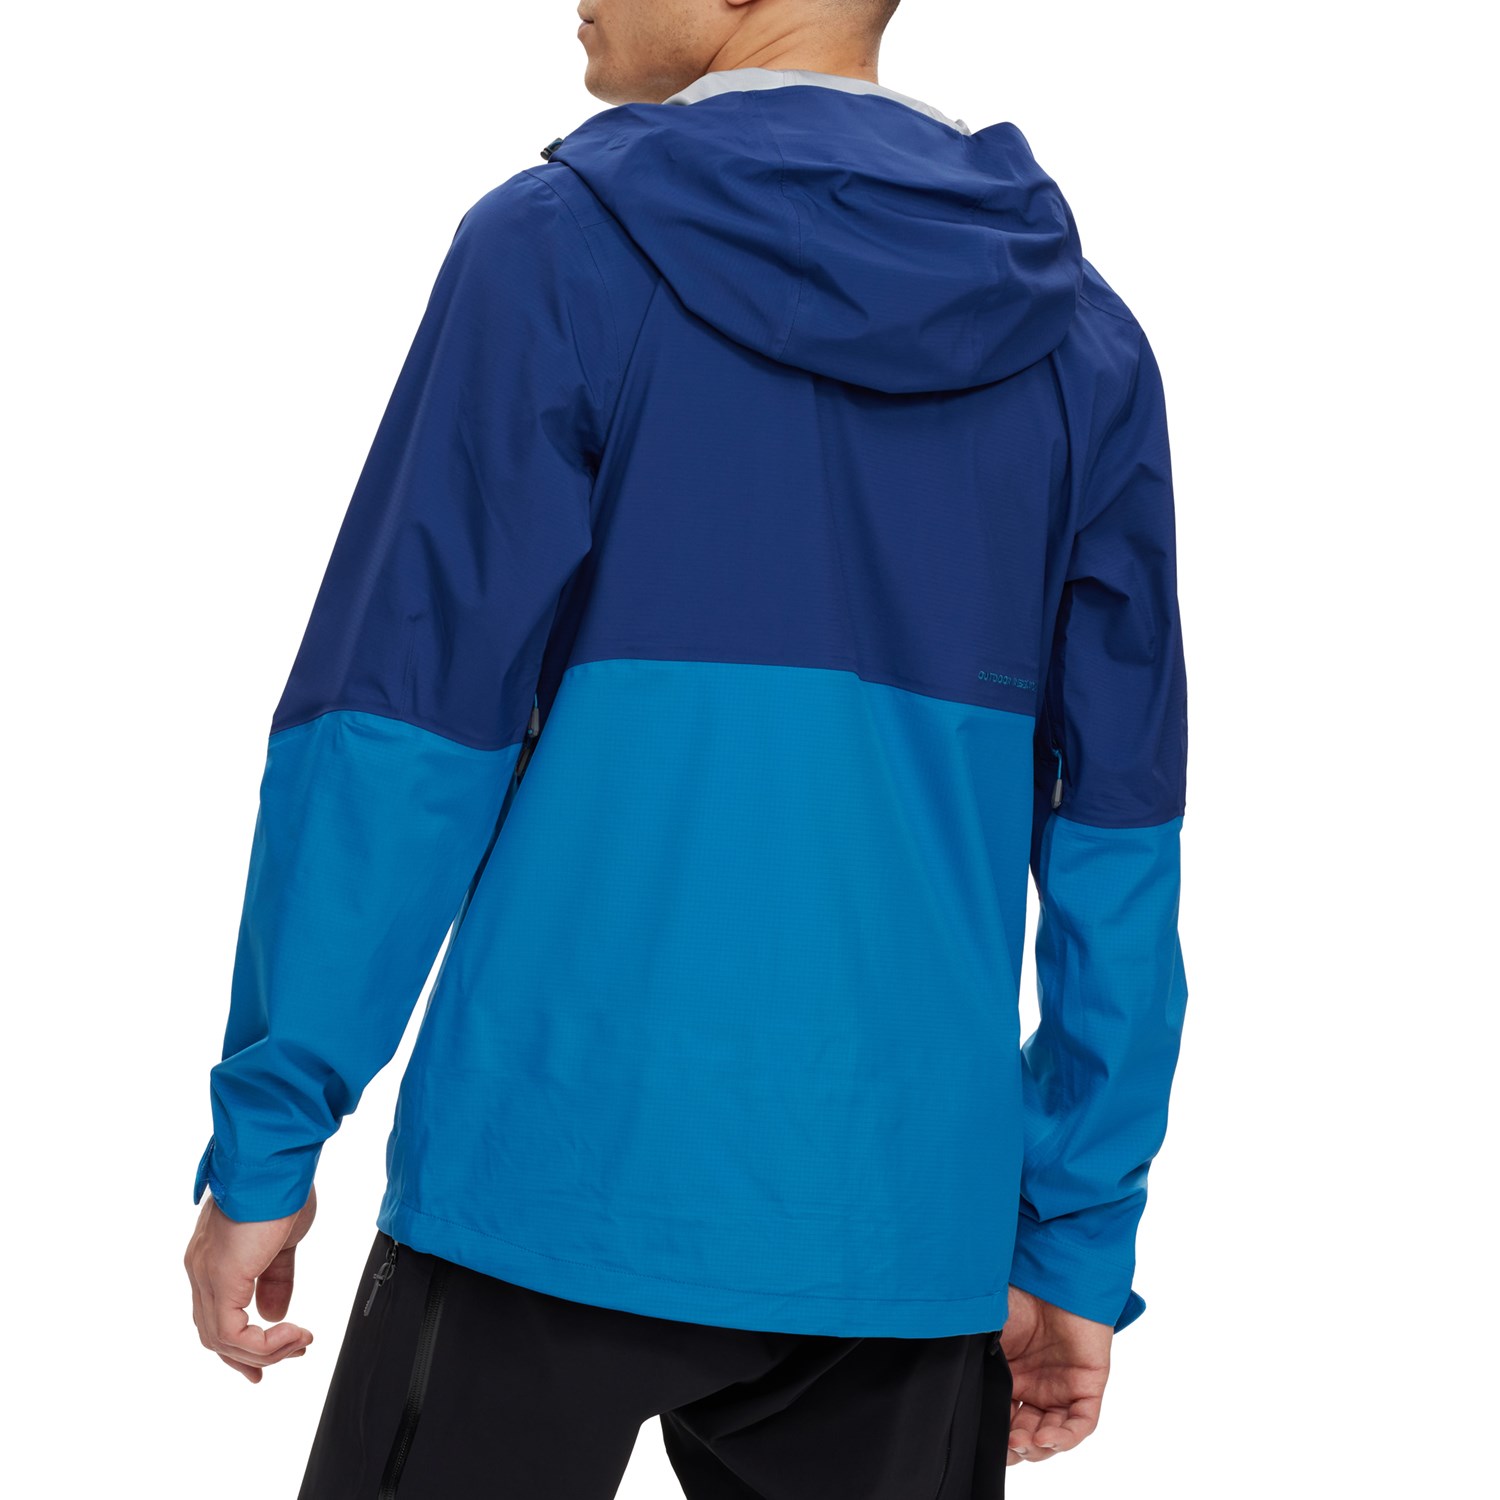 Outdoor Research Carbide Jacket - The Best Backcountry Jacket for Under  $300 - Engearment